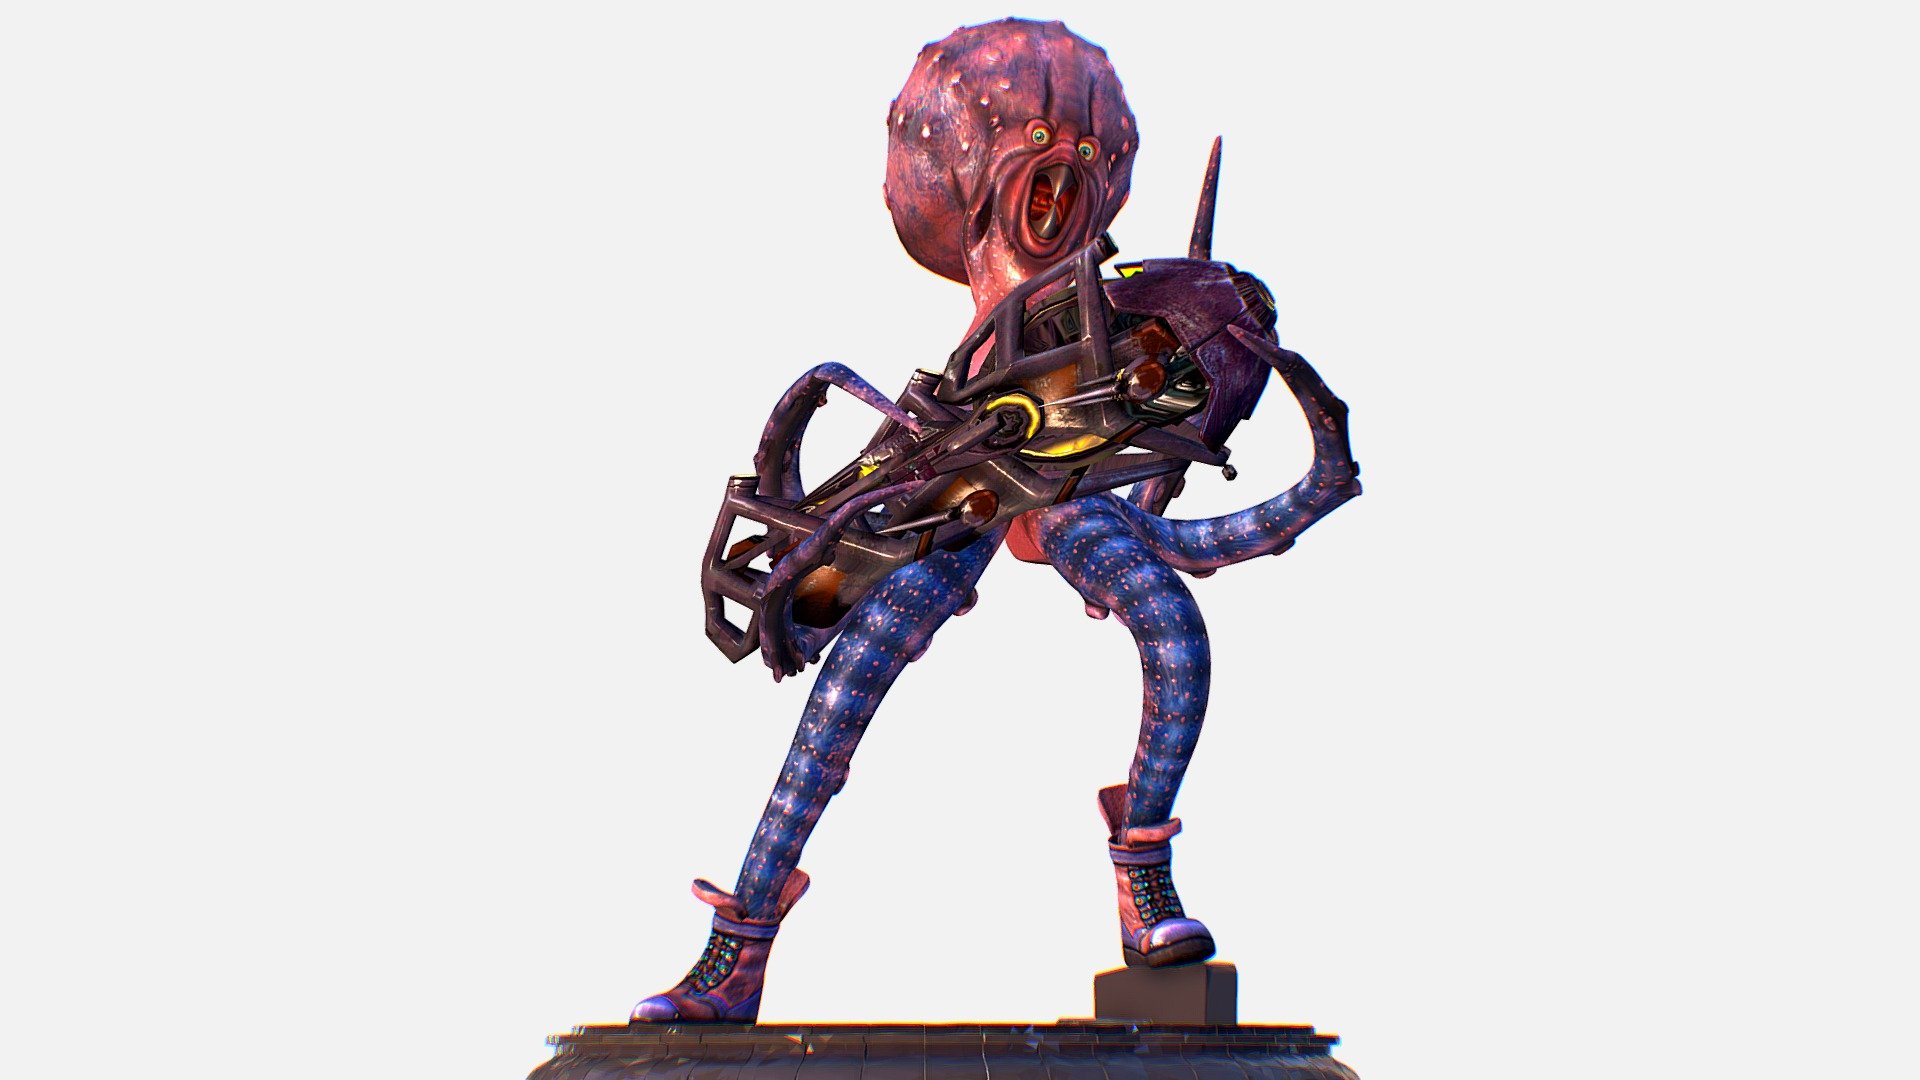 Skined Octopus Soldier with Big Laser Gun